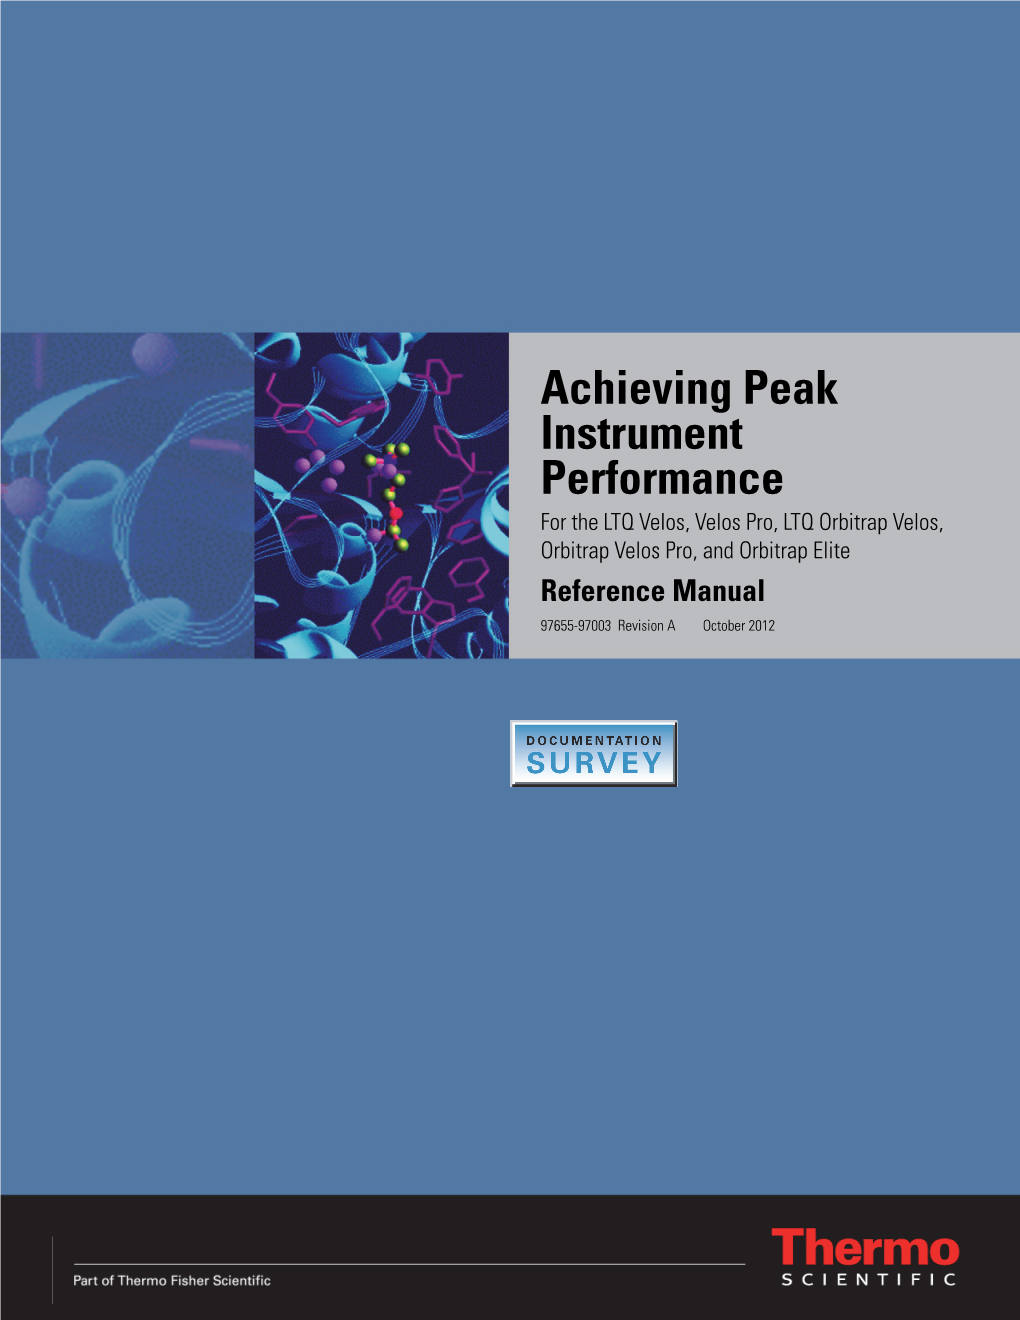 Achieving Peak Instrument Performance Reference Manual Xi Contents